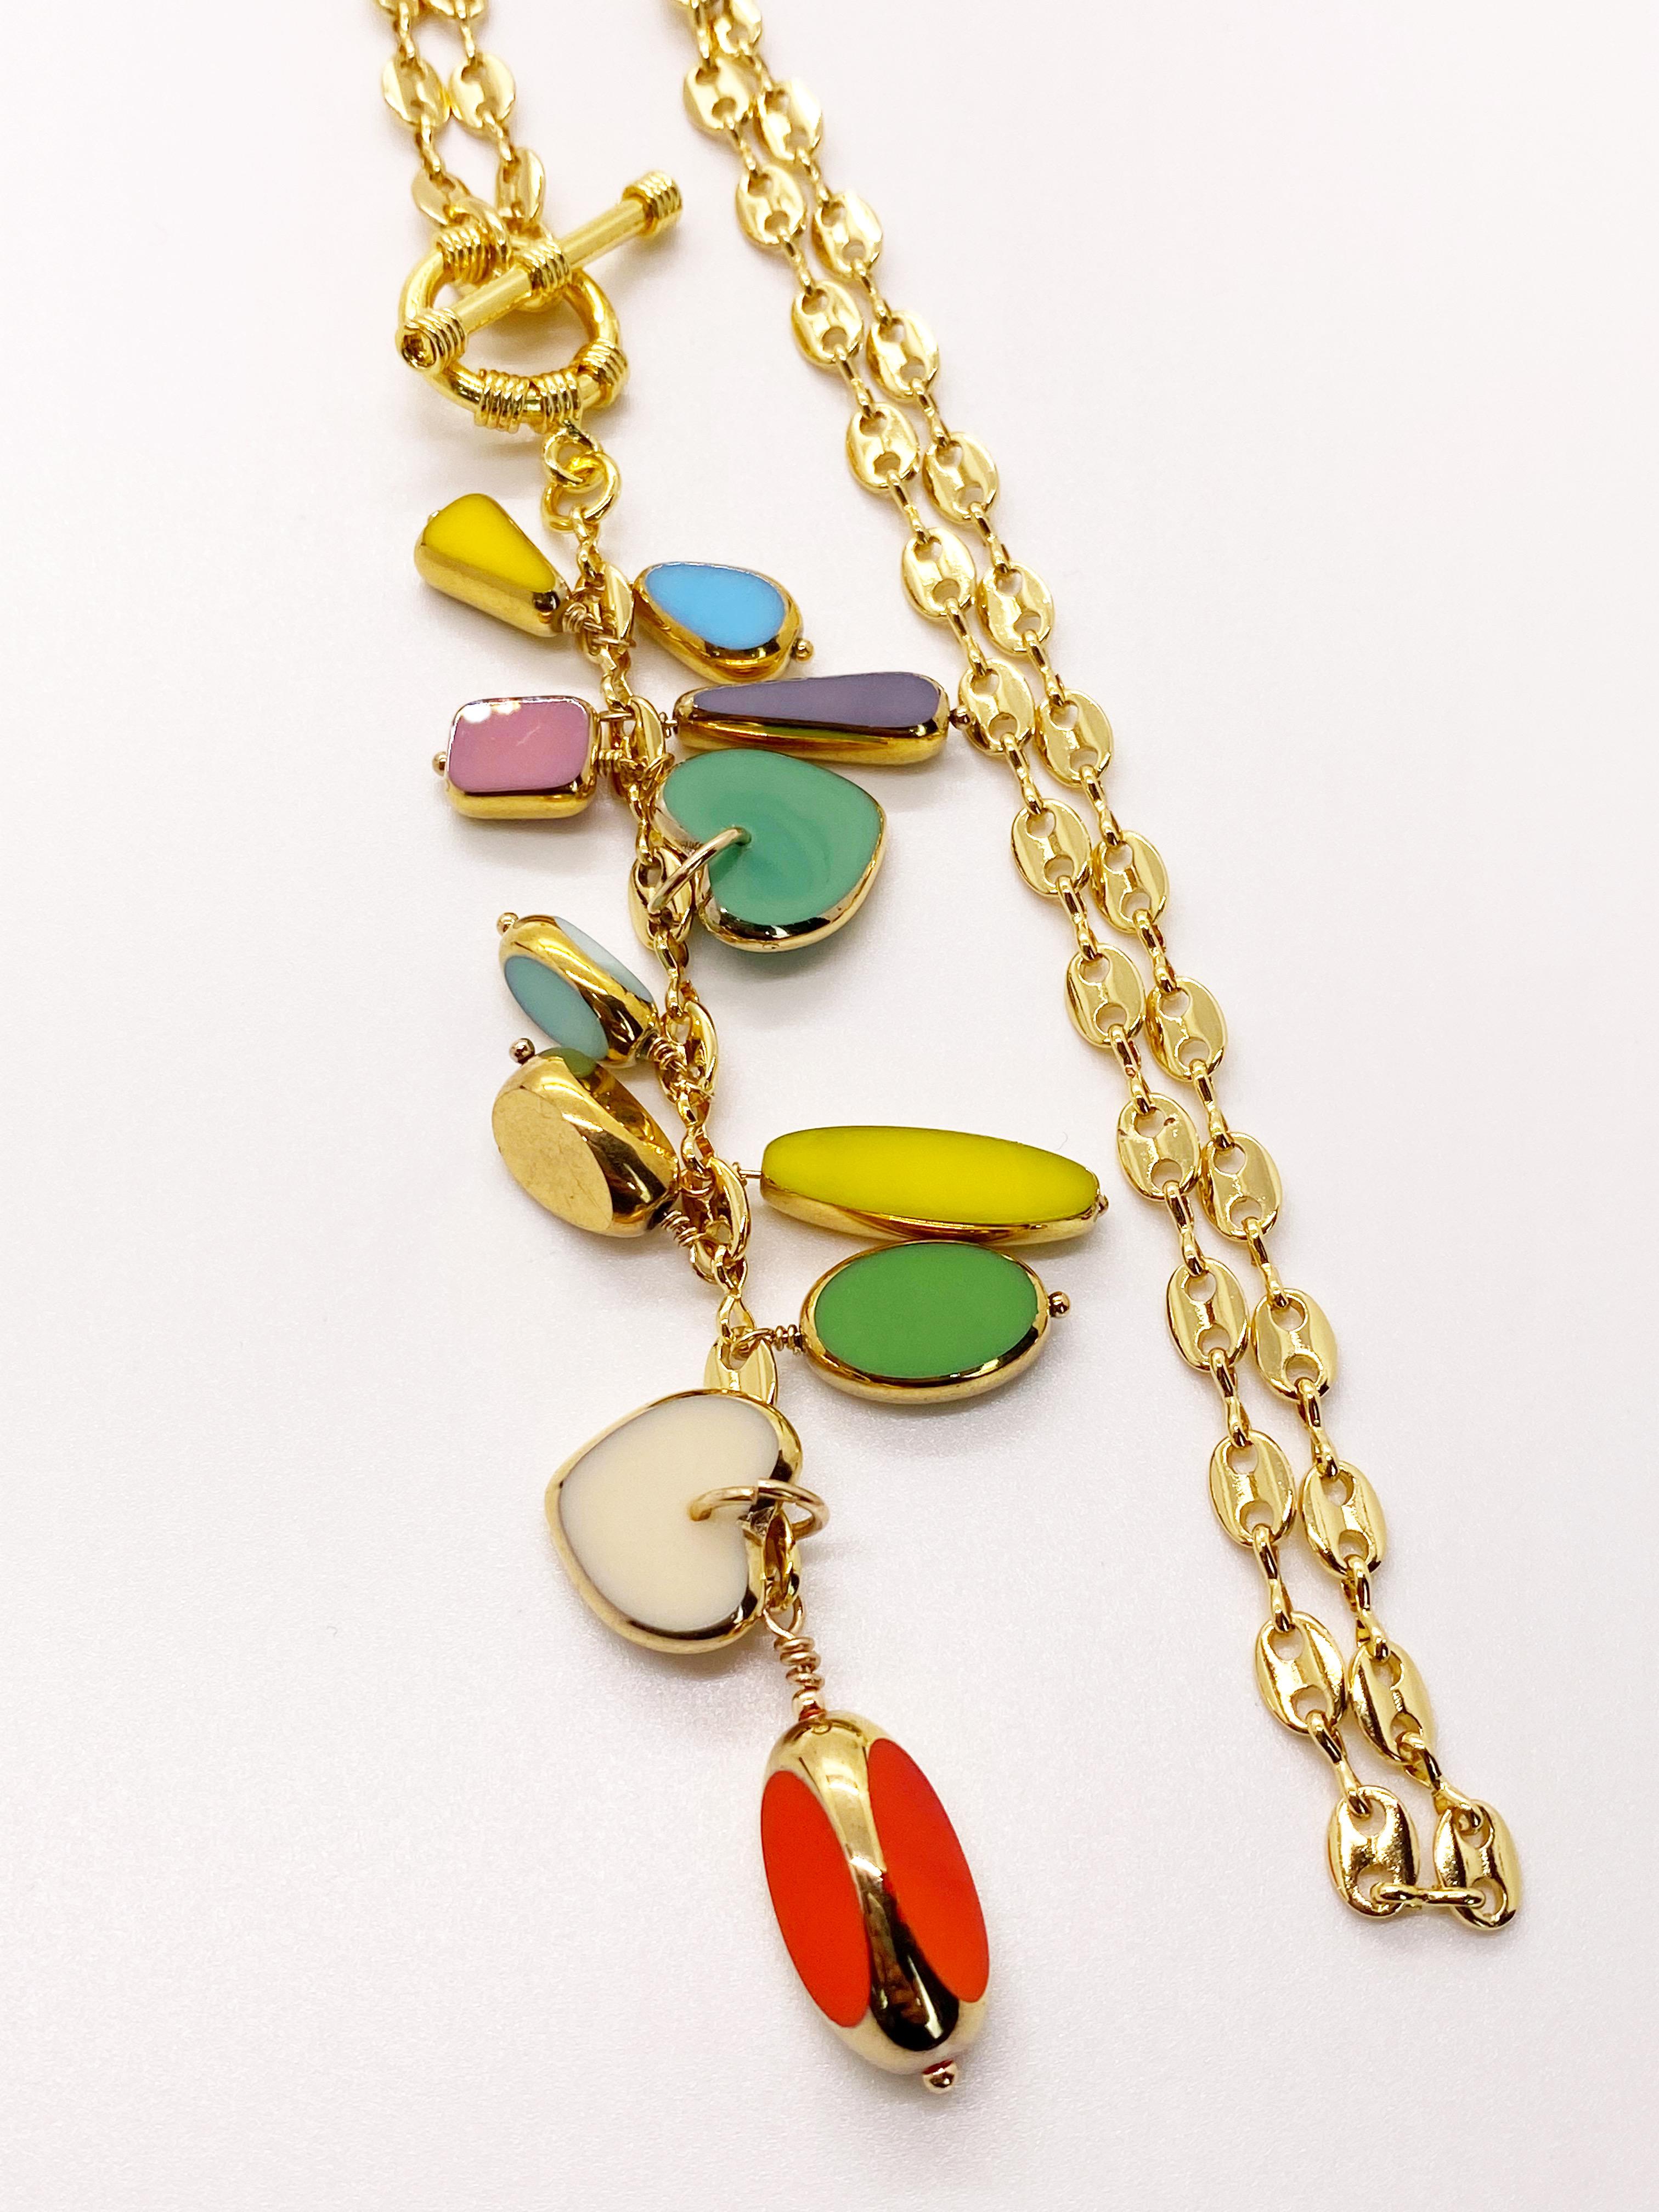 24K gold-filled chain and 18K gold-filled toggle clasp, adorned with 11 colored 24K gold edge German vintage glass beads. The necklace measures at 18 inches with about a 4 inch drop. 
*Charms will vary*

The 24K gold edge German vintage beads are